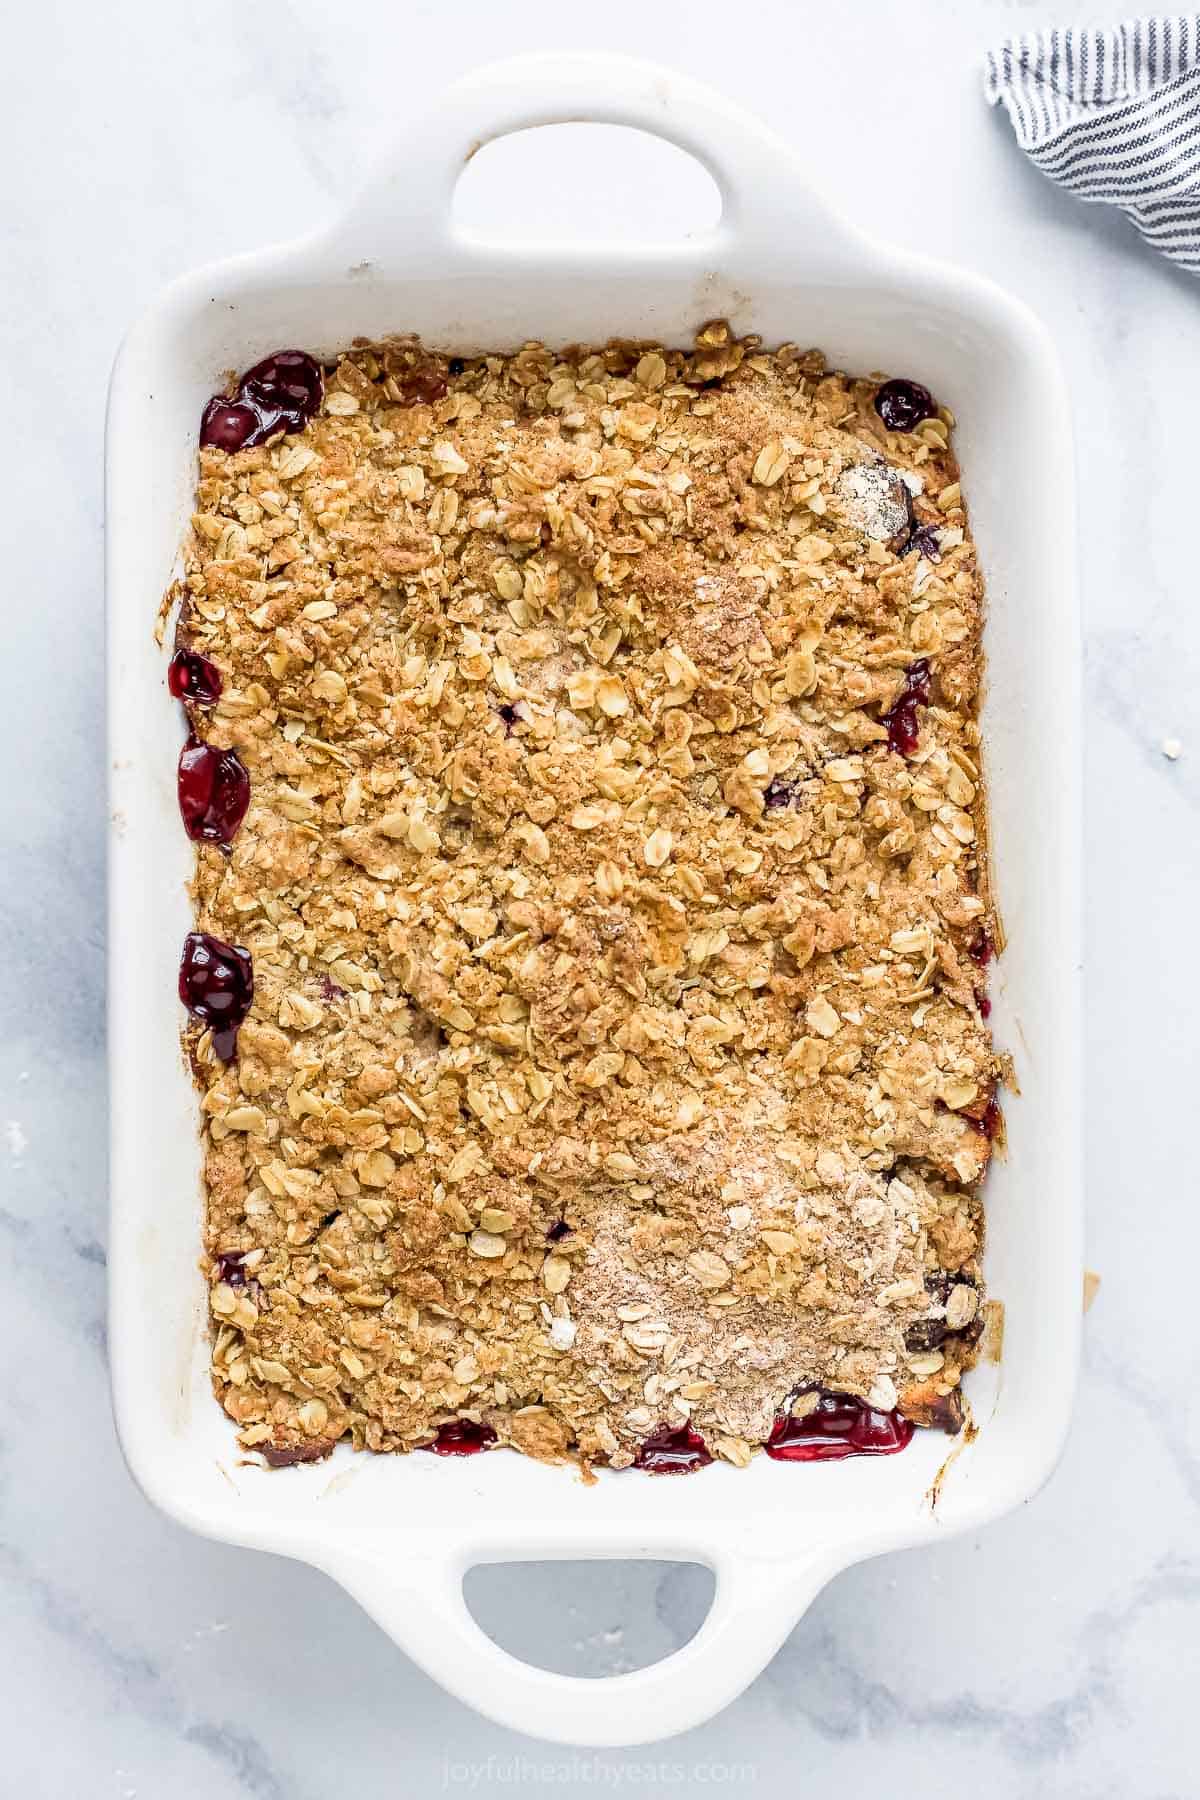 apple blueberry crumble in a baking dish